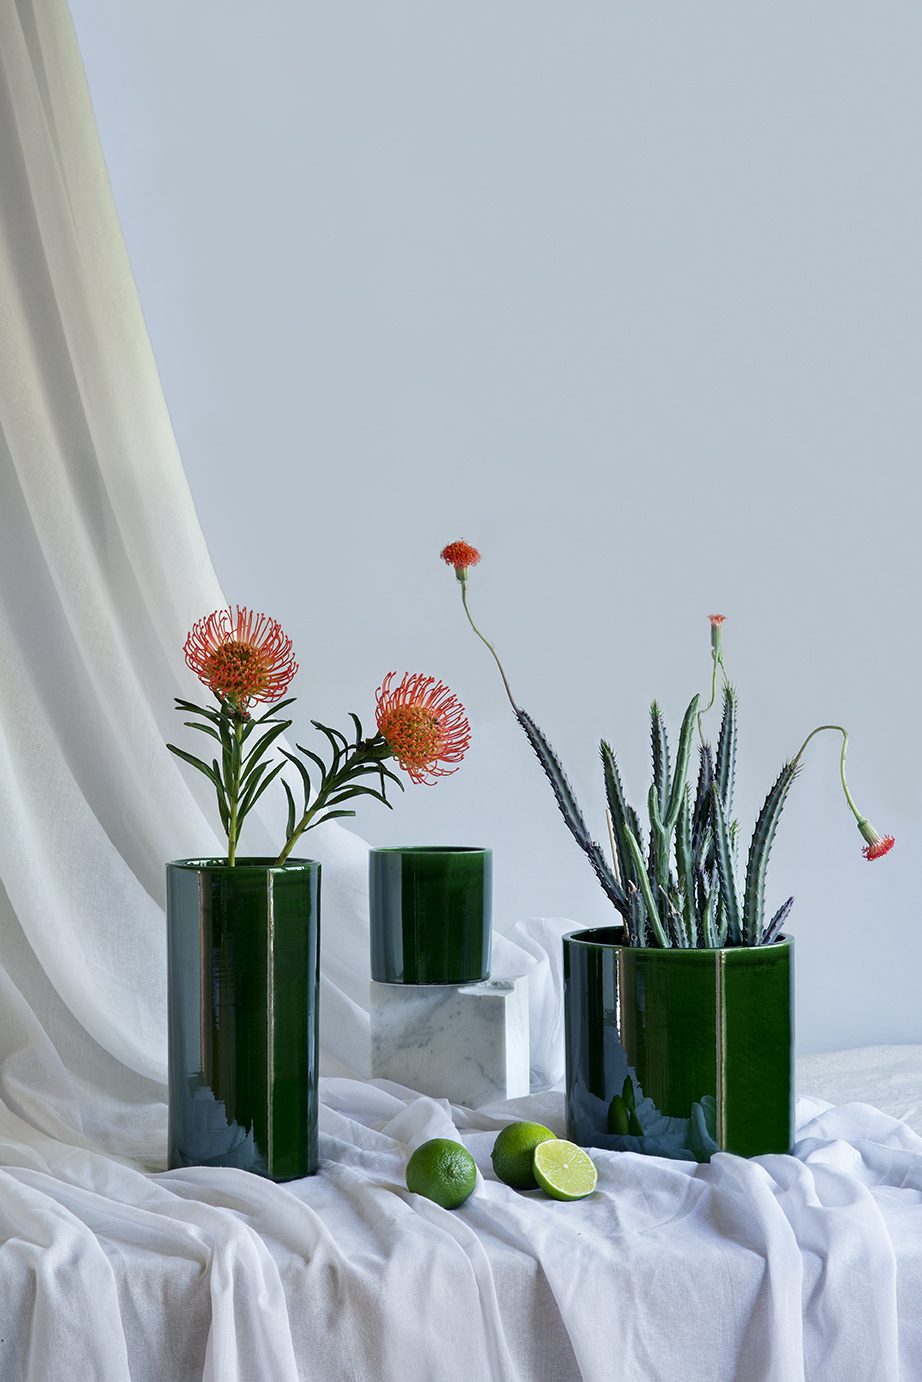 Cylindrical green glazed vase and flowerpots with flowers